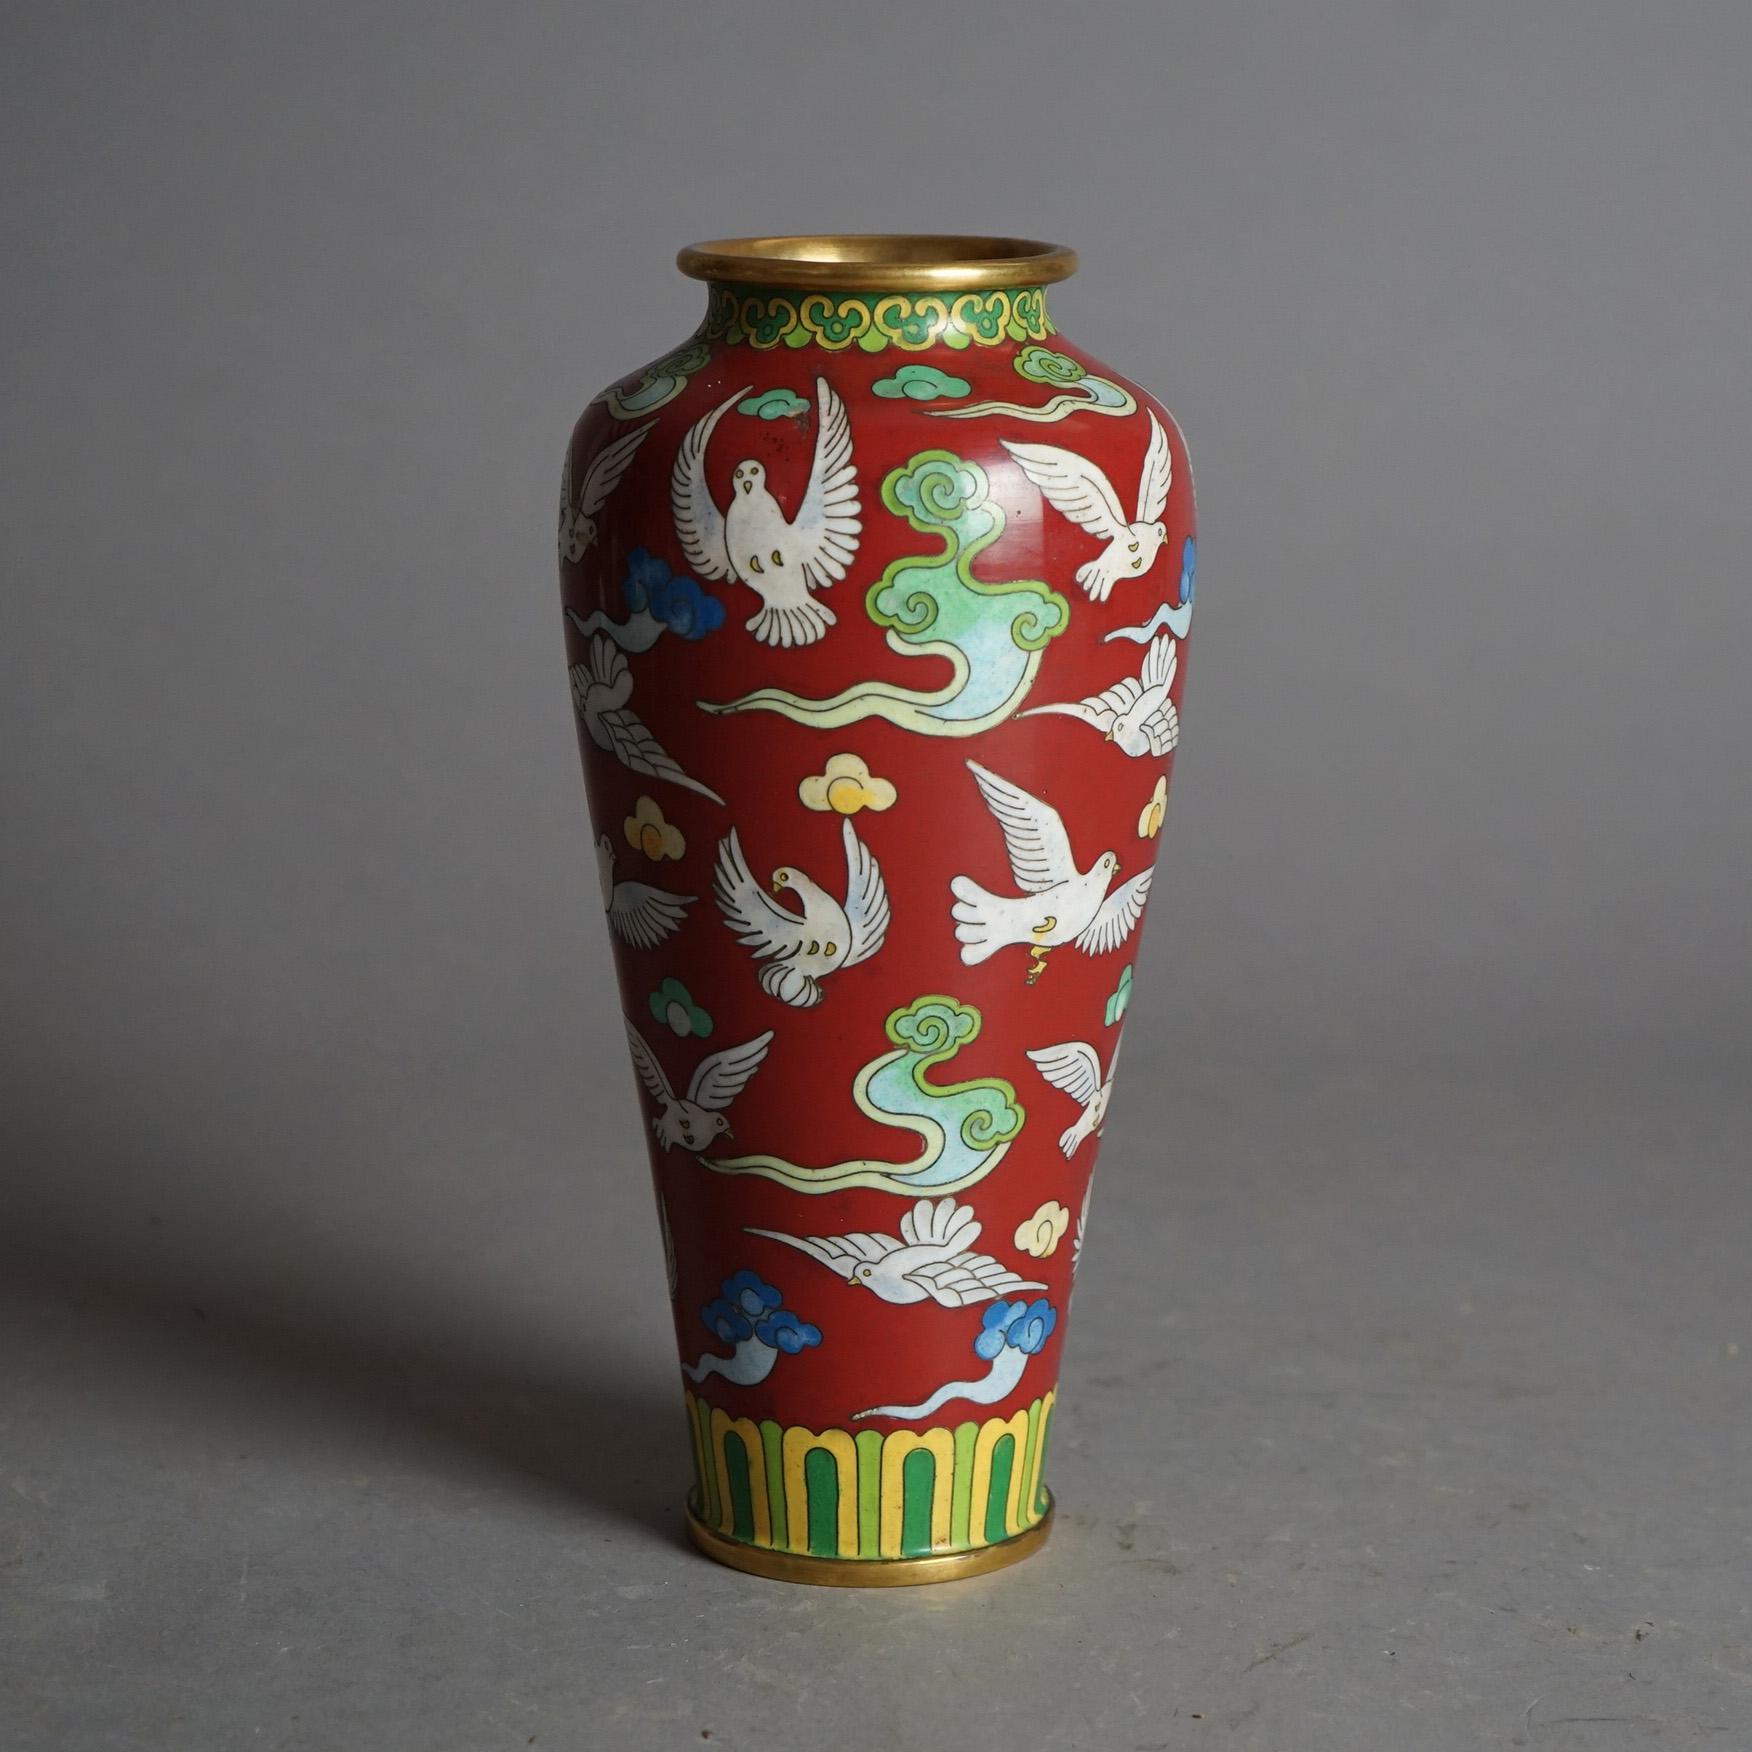 An antique Chinese vase offers metal construction with Cloisonne enameled allover dove (bird) and cloud design, c1920

Measures - 9